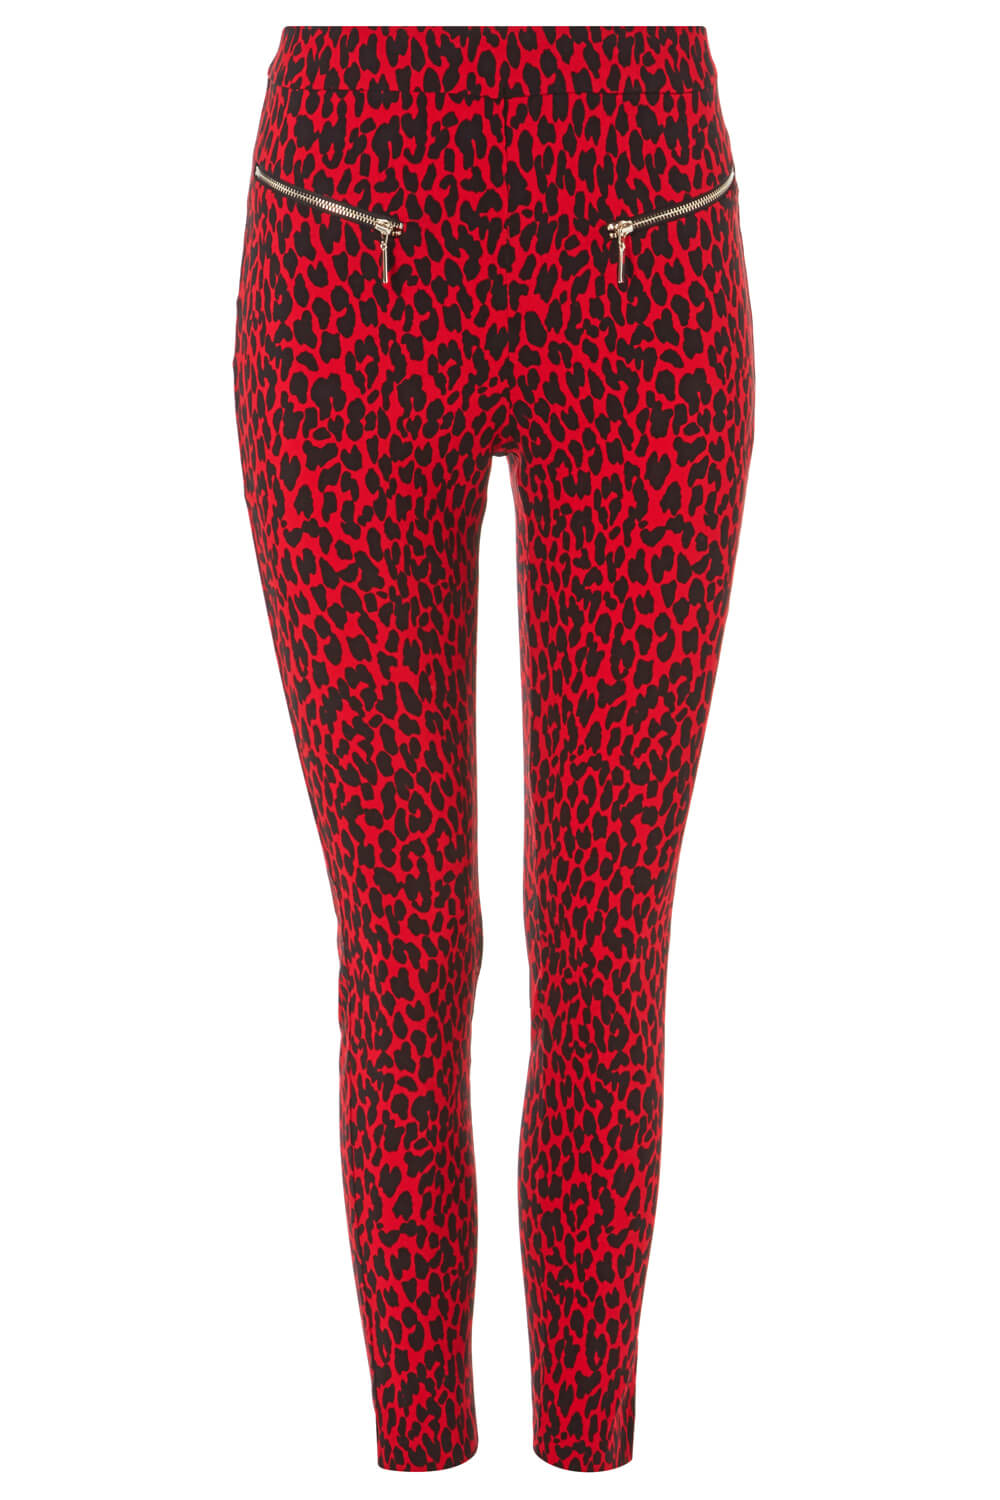 Red Animal Print Full Length Trousers , Image 5 of 5